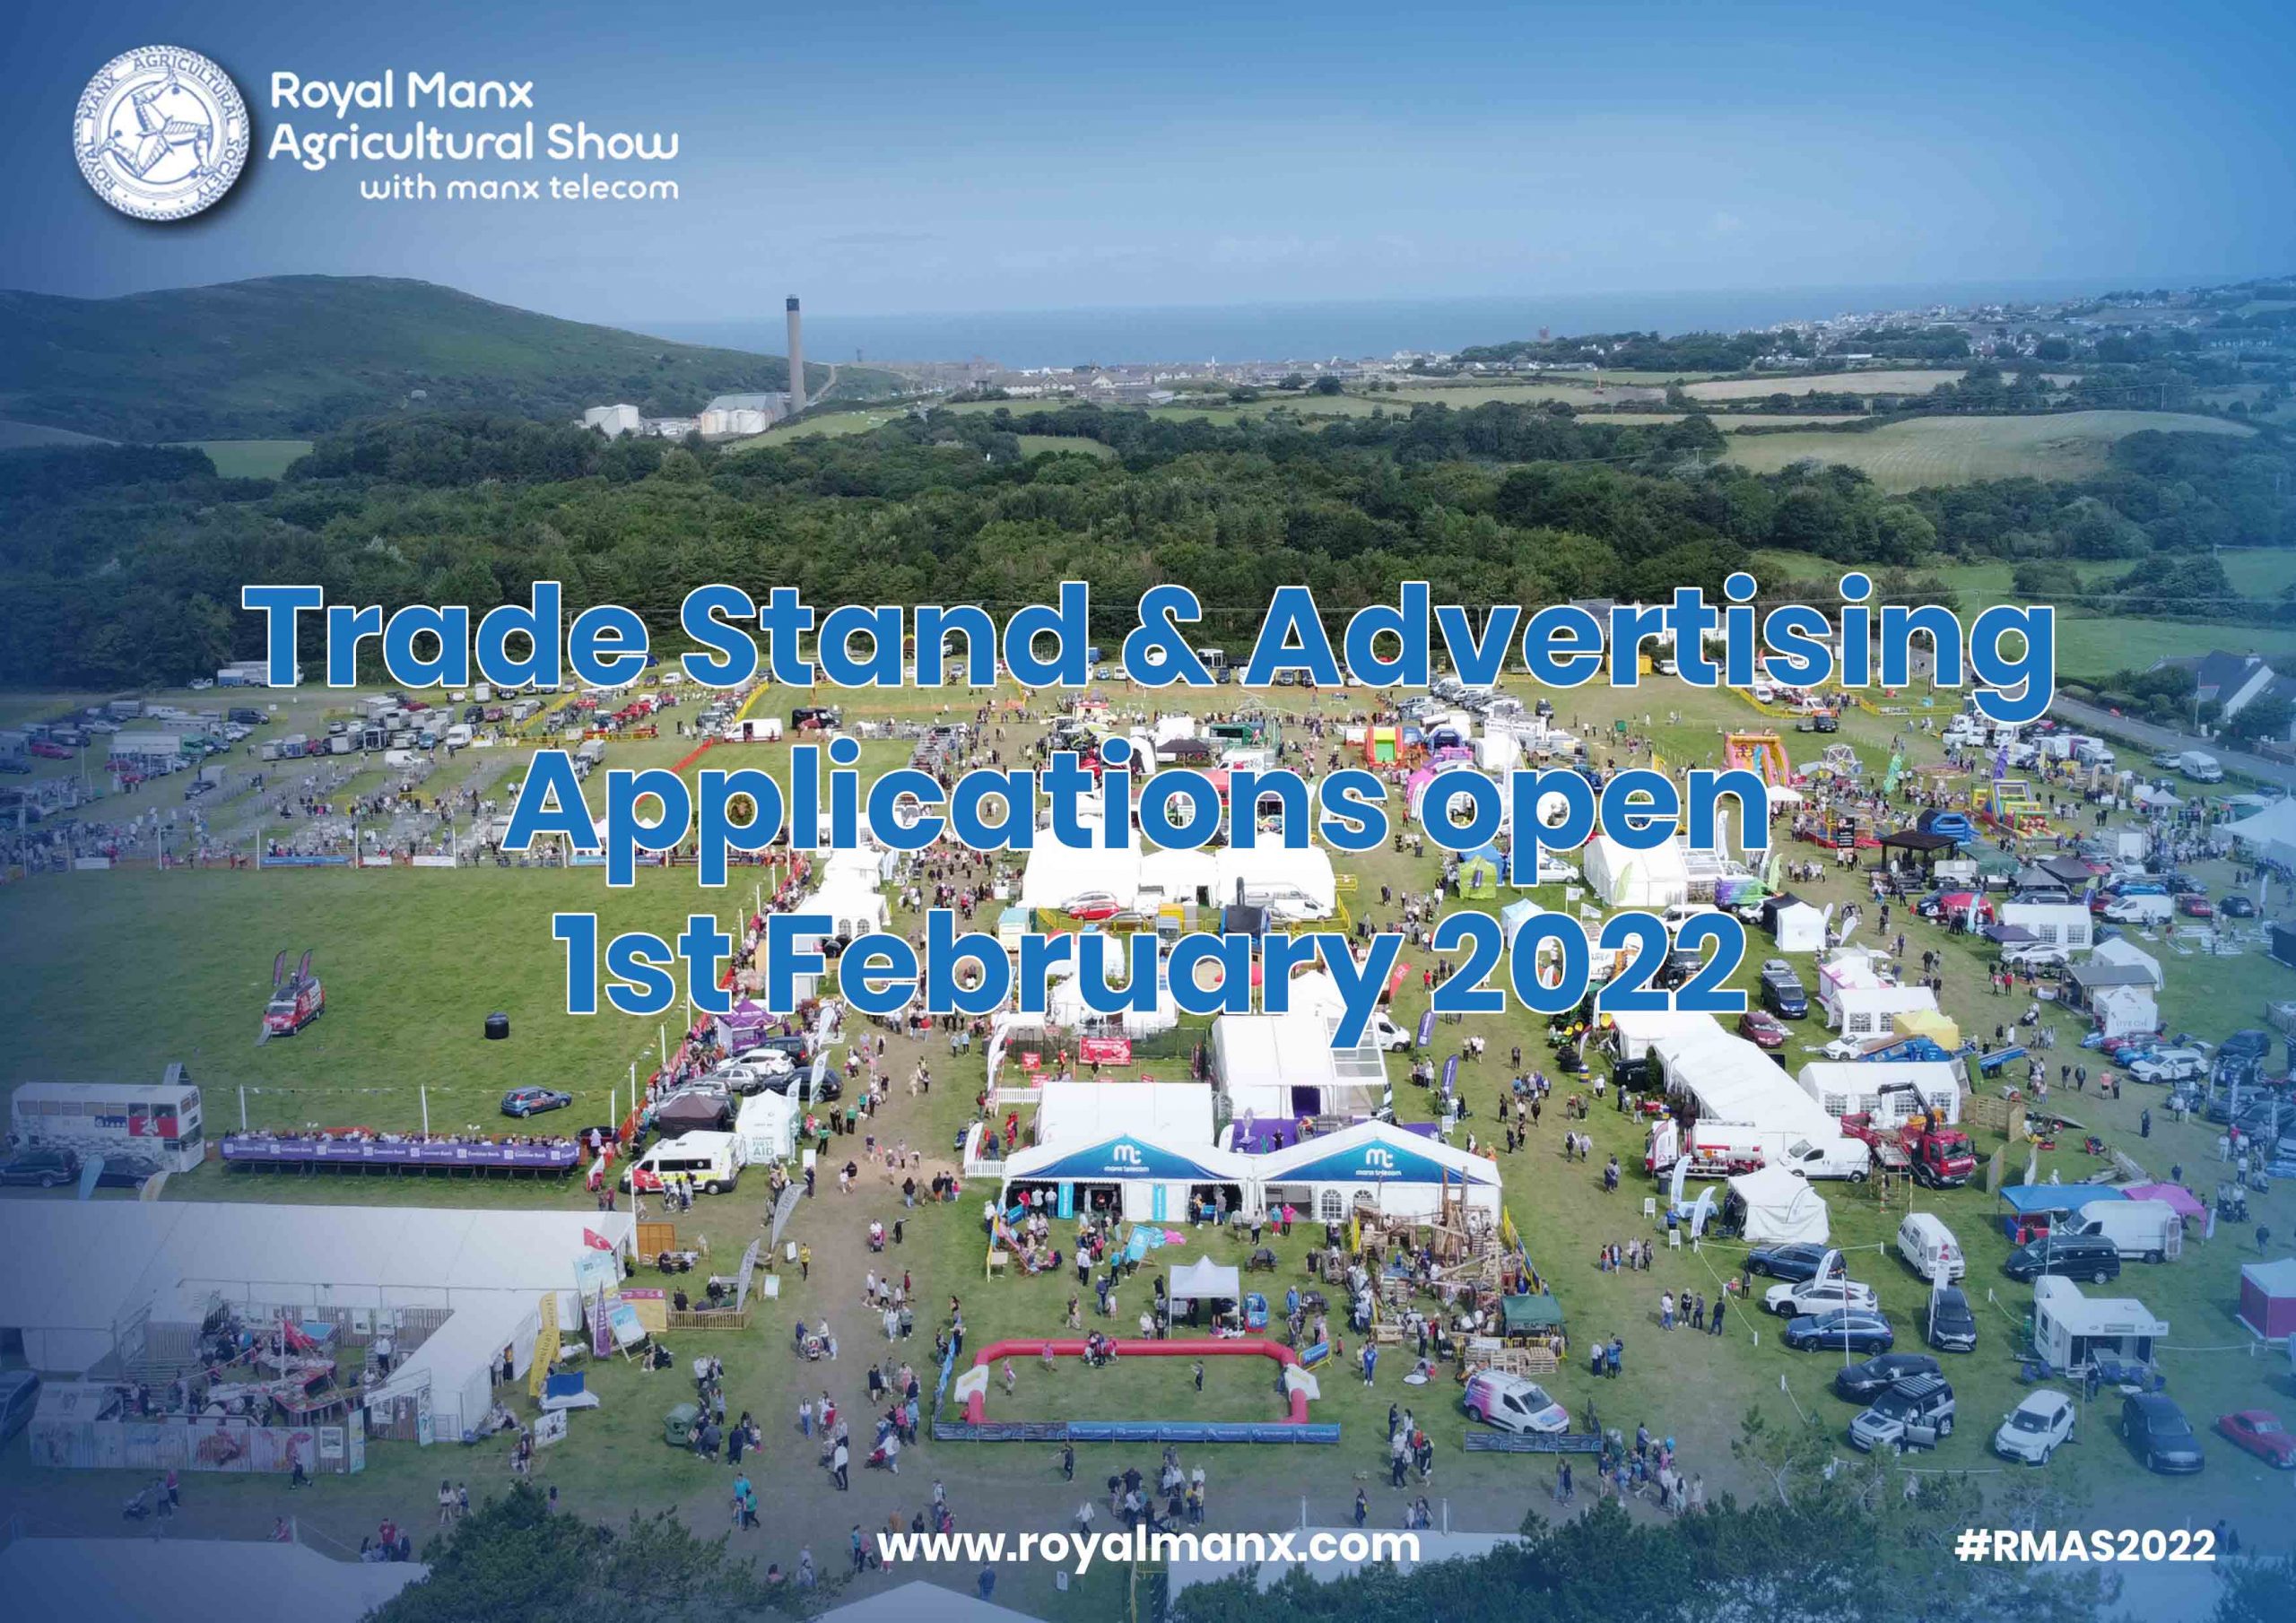 Trade Stand & Advertising Applications open on 1st February 2022